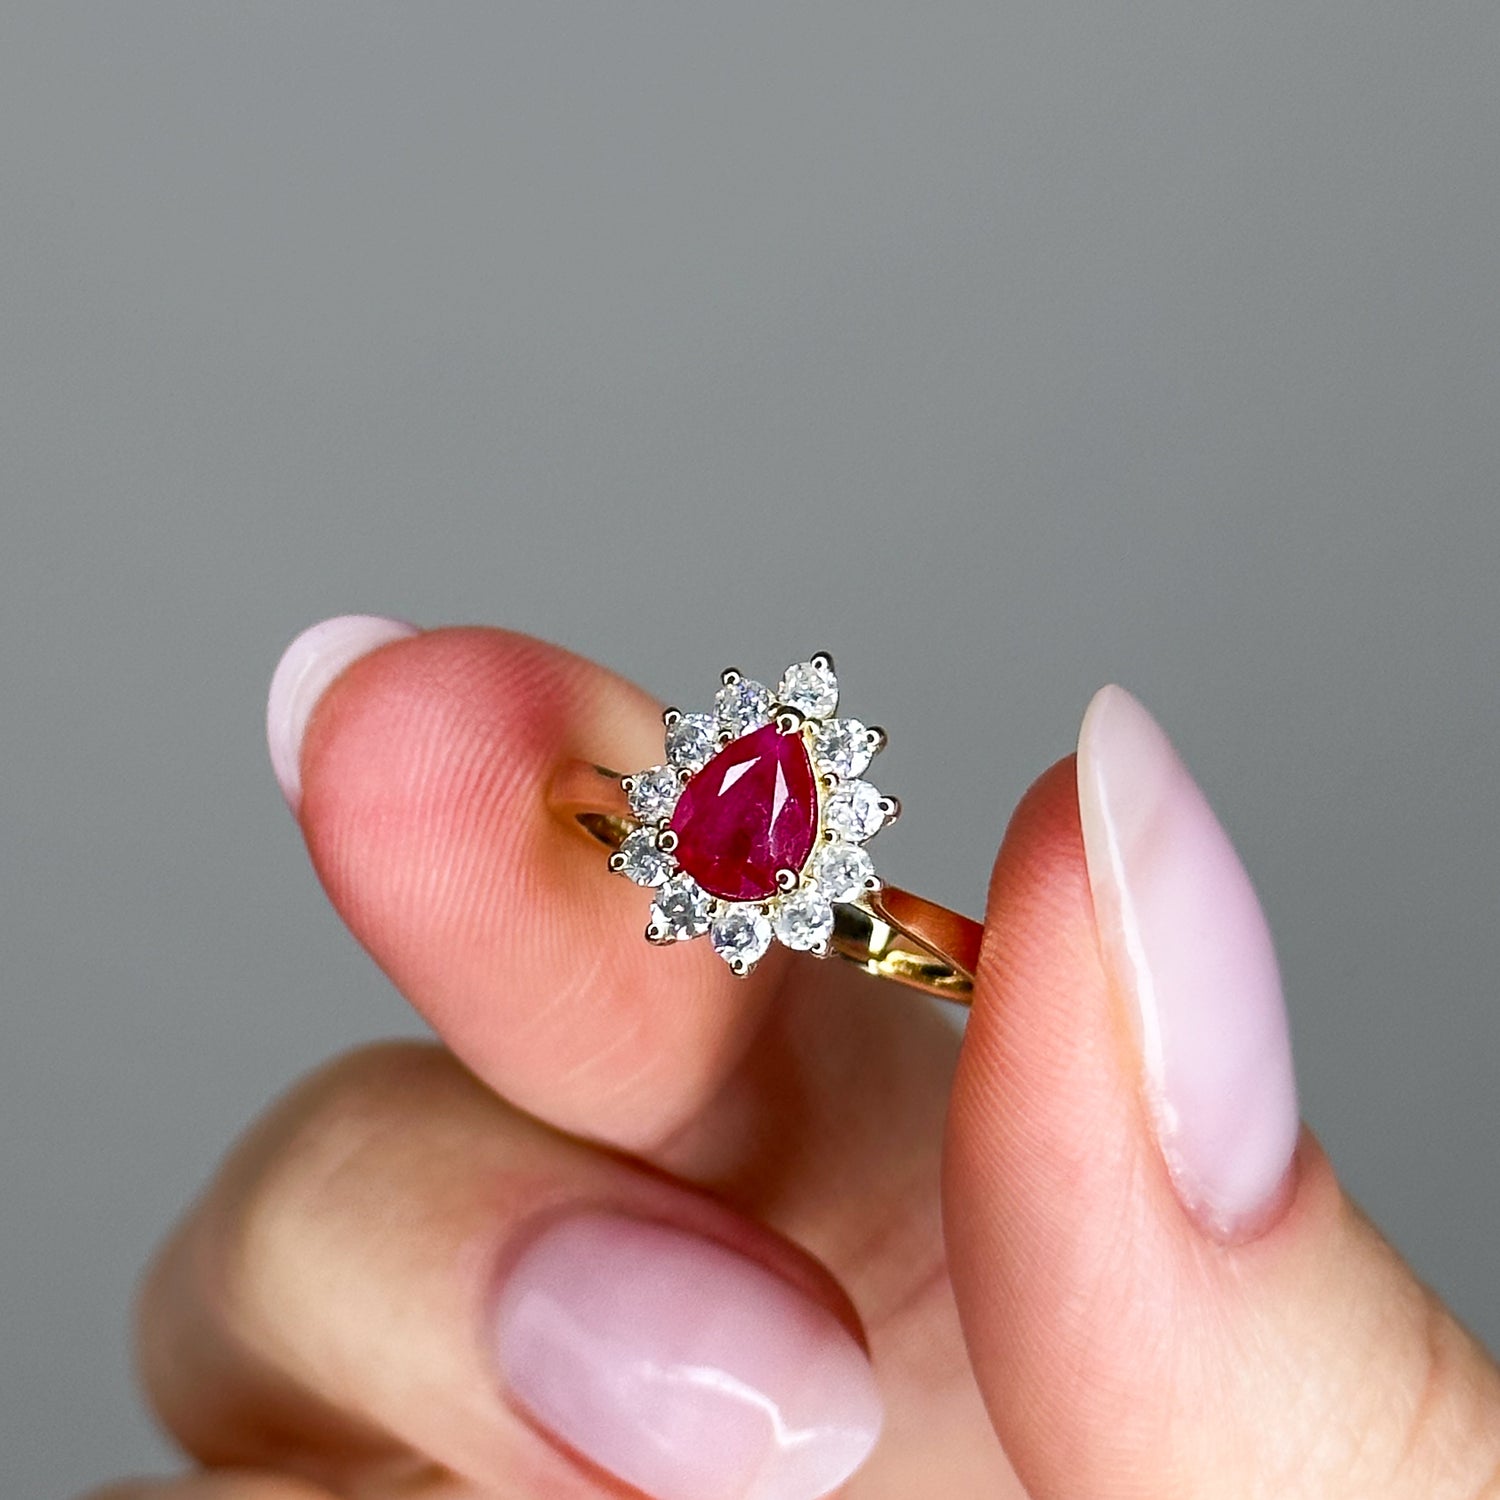 0.80ct Pear Shape Pink Ruby Ring with Diamond Halo